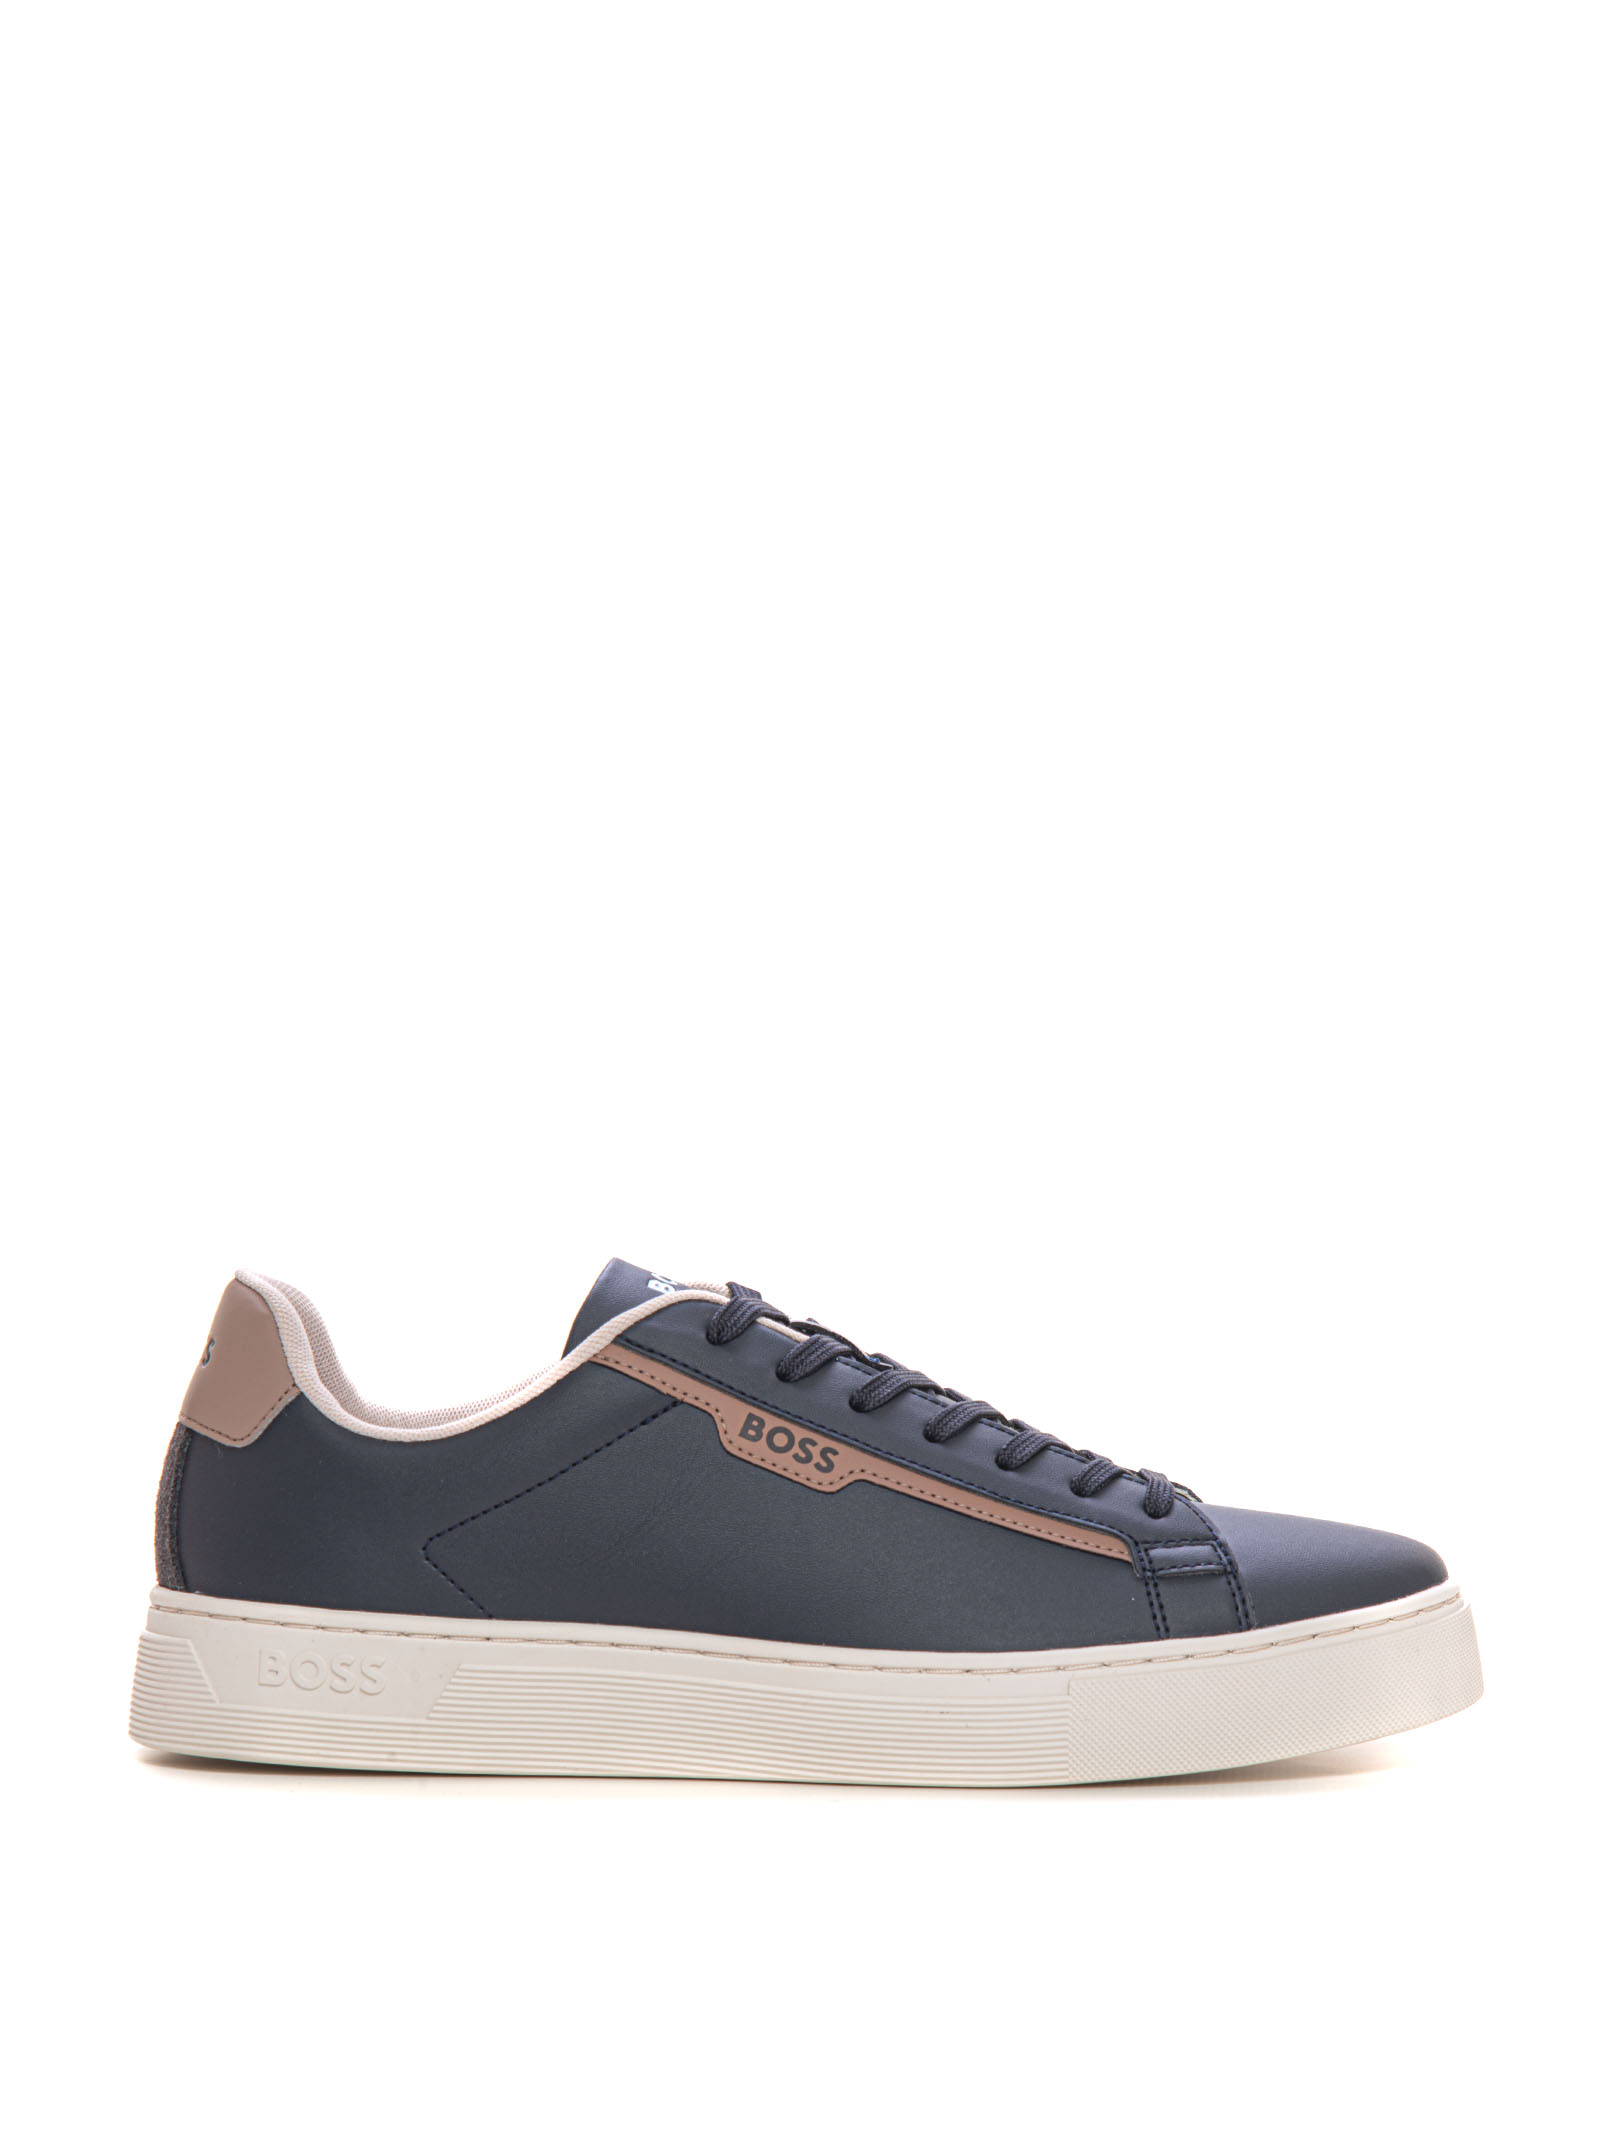 Hugo Boss Rhys-tenn-pusdth Leather Sneakers With Laces In Blue